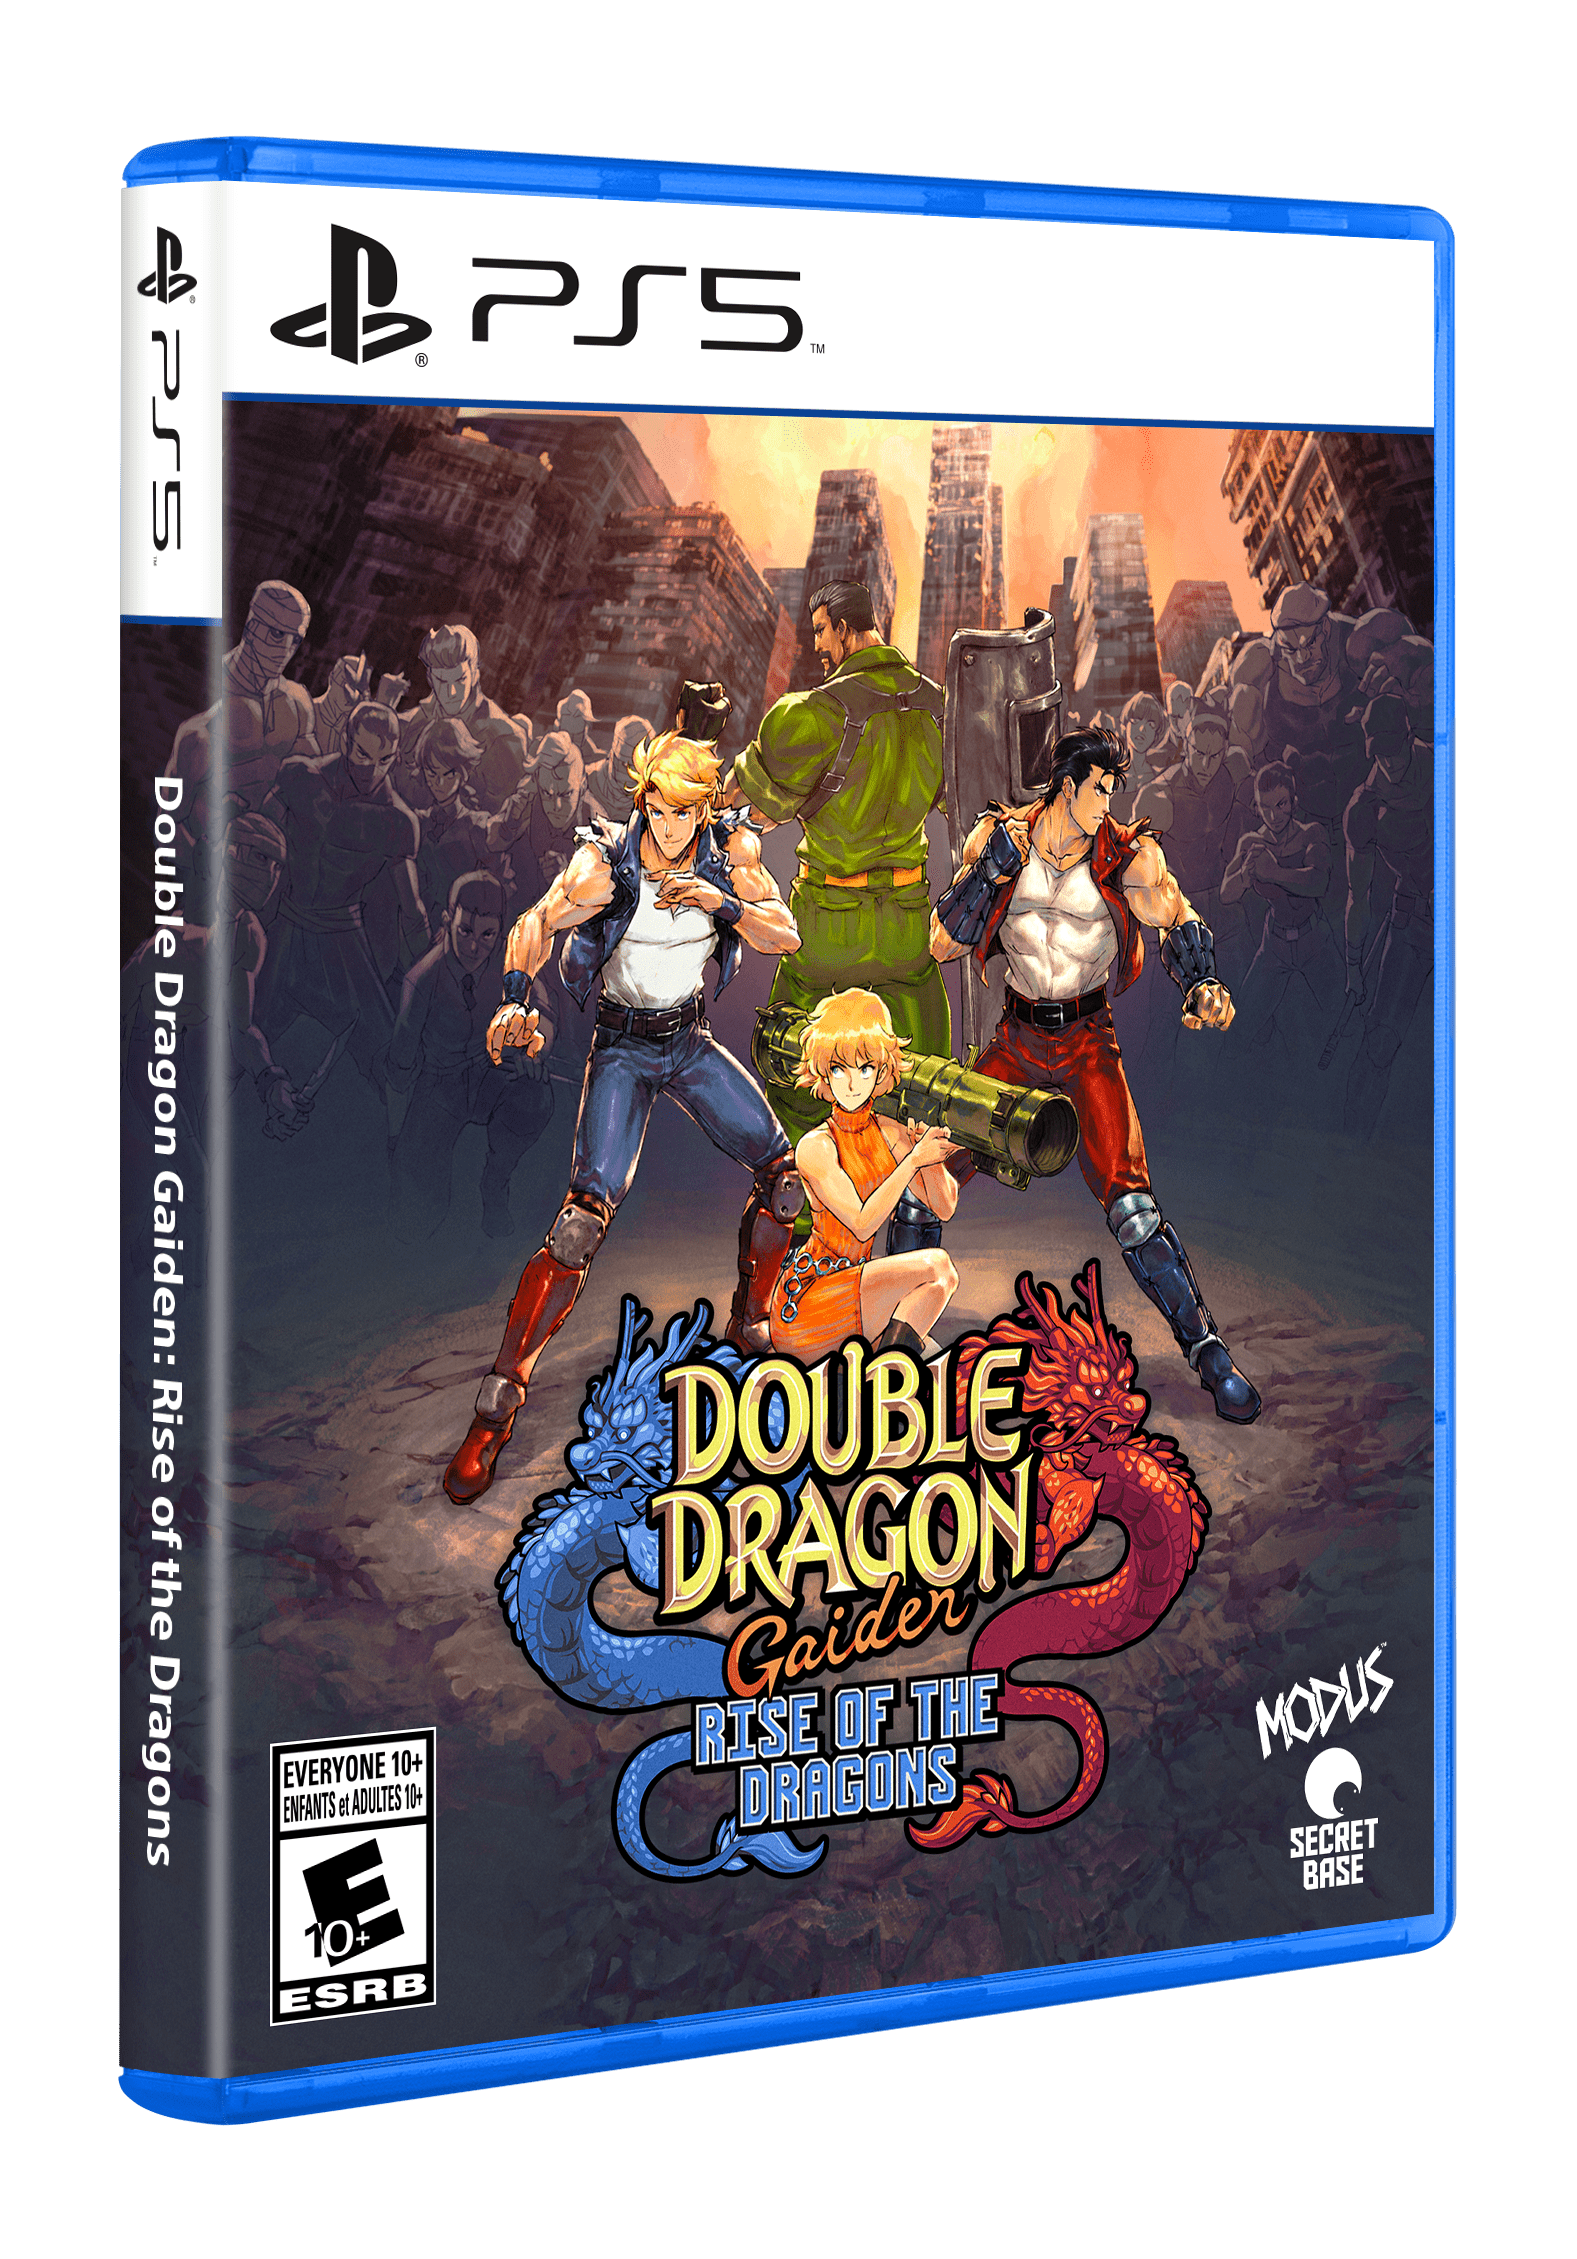 Double Dragon Gaiden: Rise of the Dragons - Official Gameplay